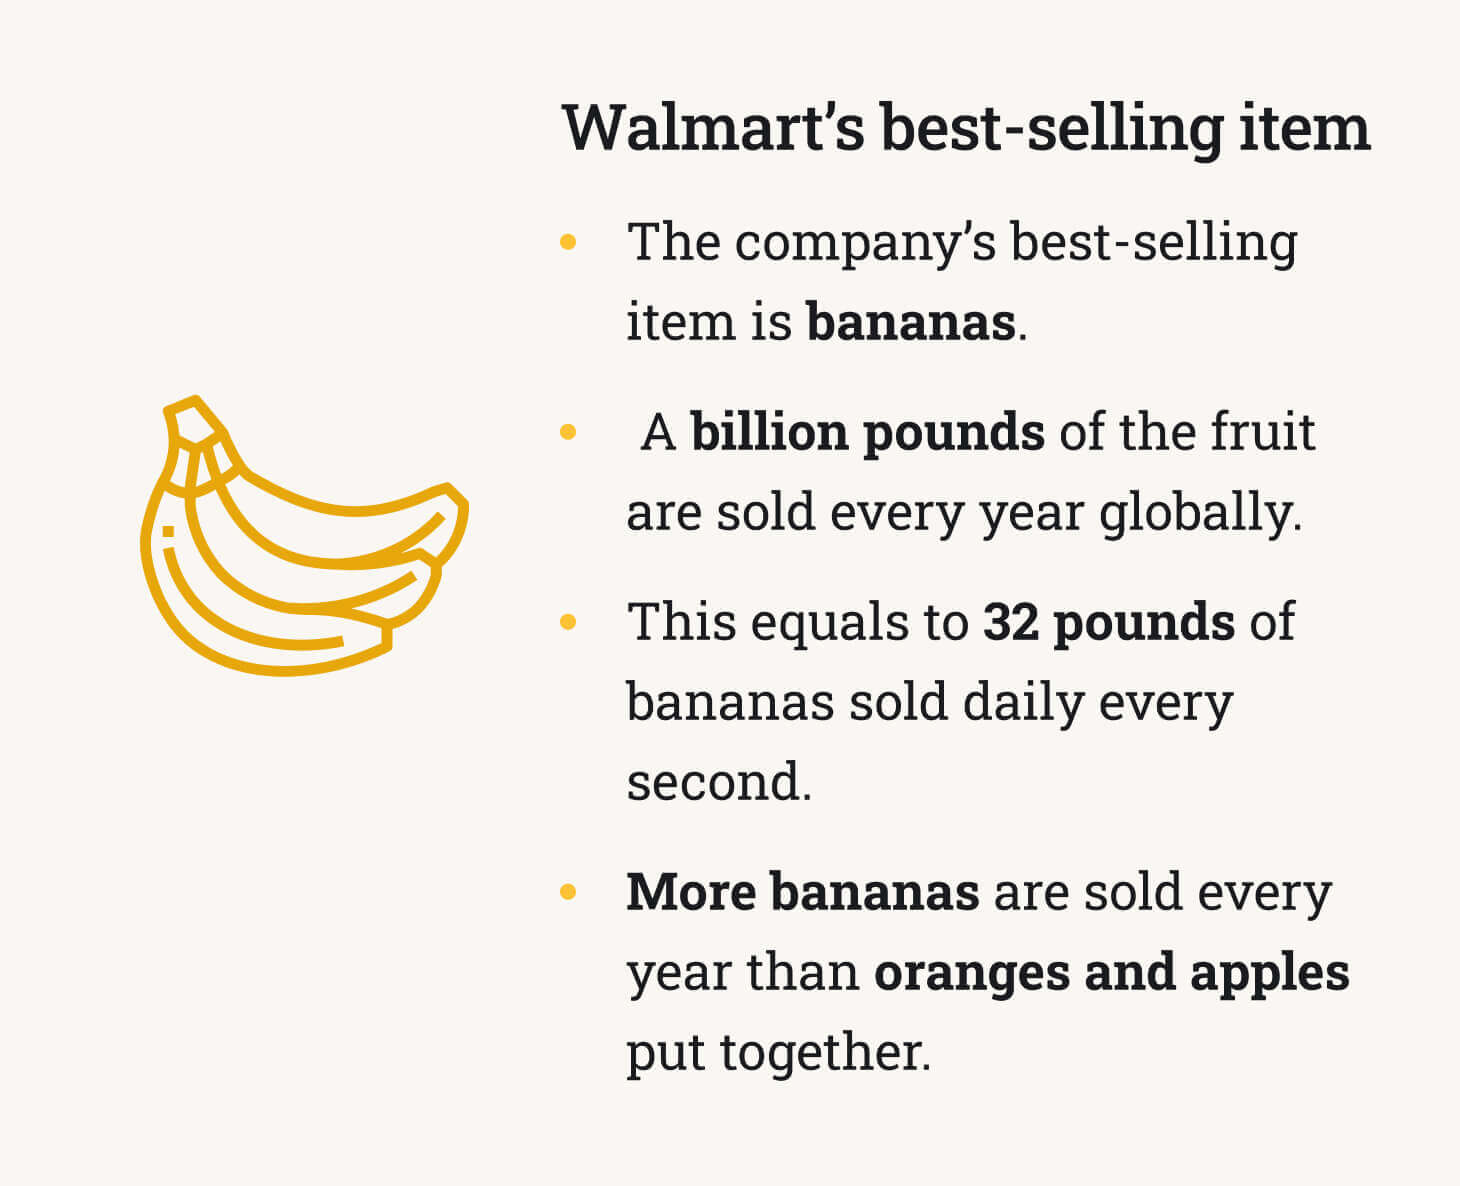 The picture provides facts about the best-selling item of Walmart.